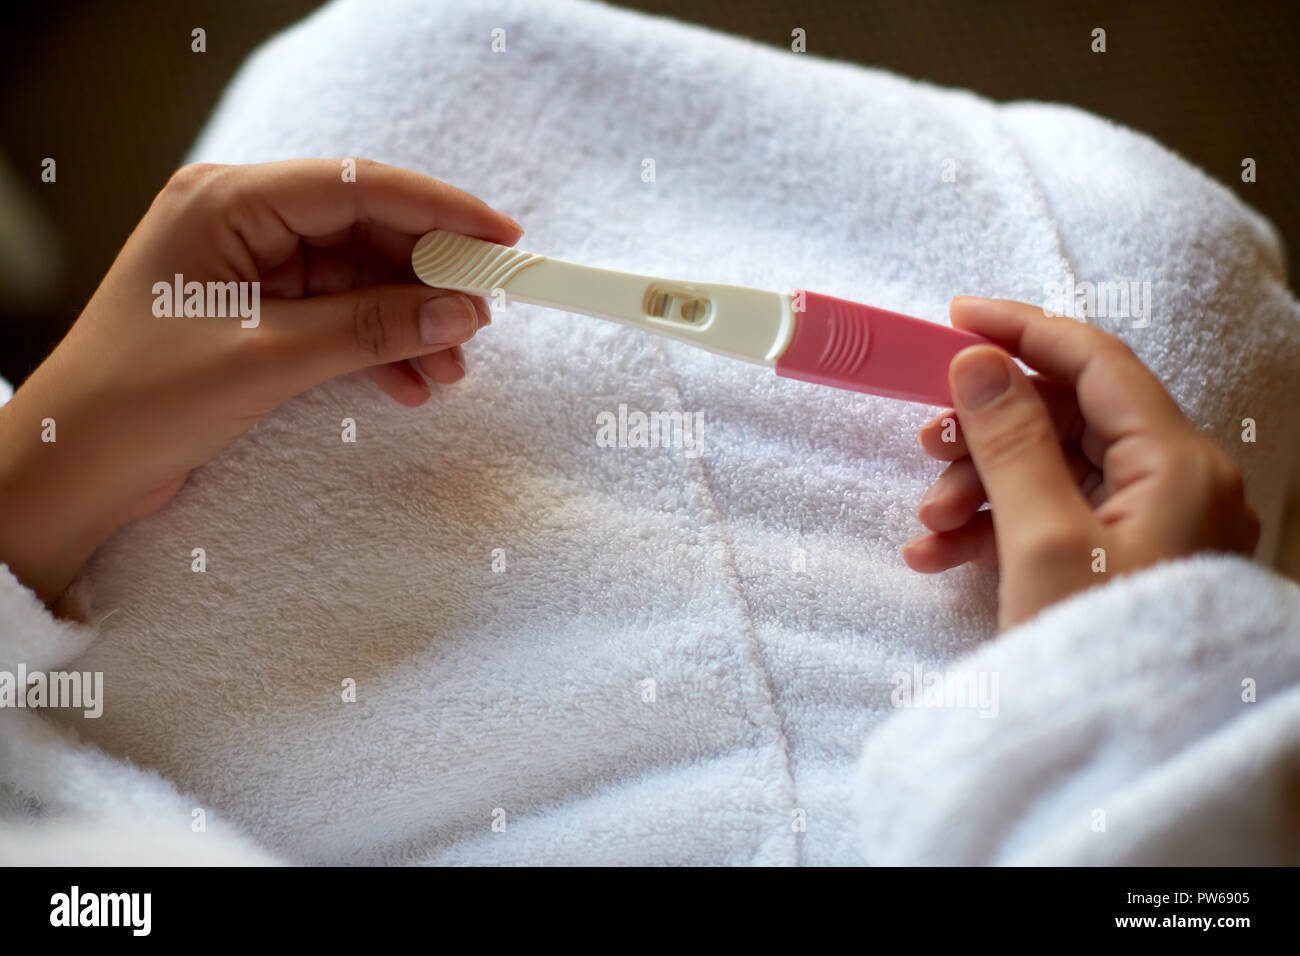 girl holding a positive pregnancy test in the hands Stock Photo